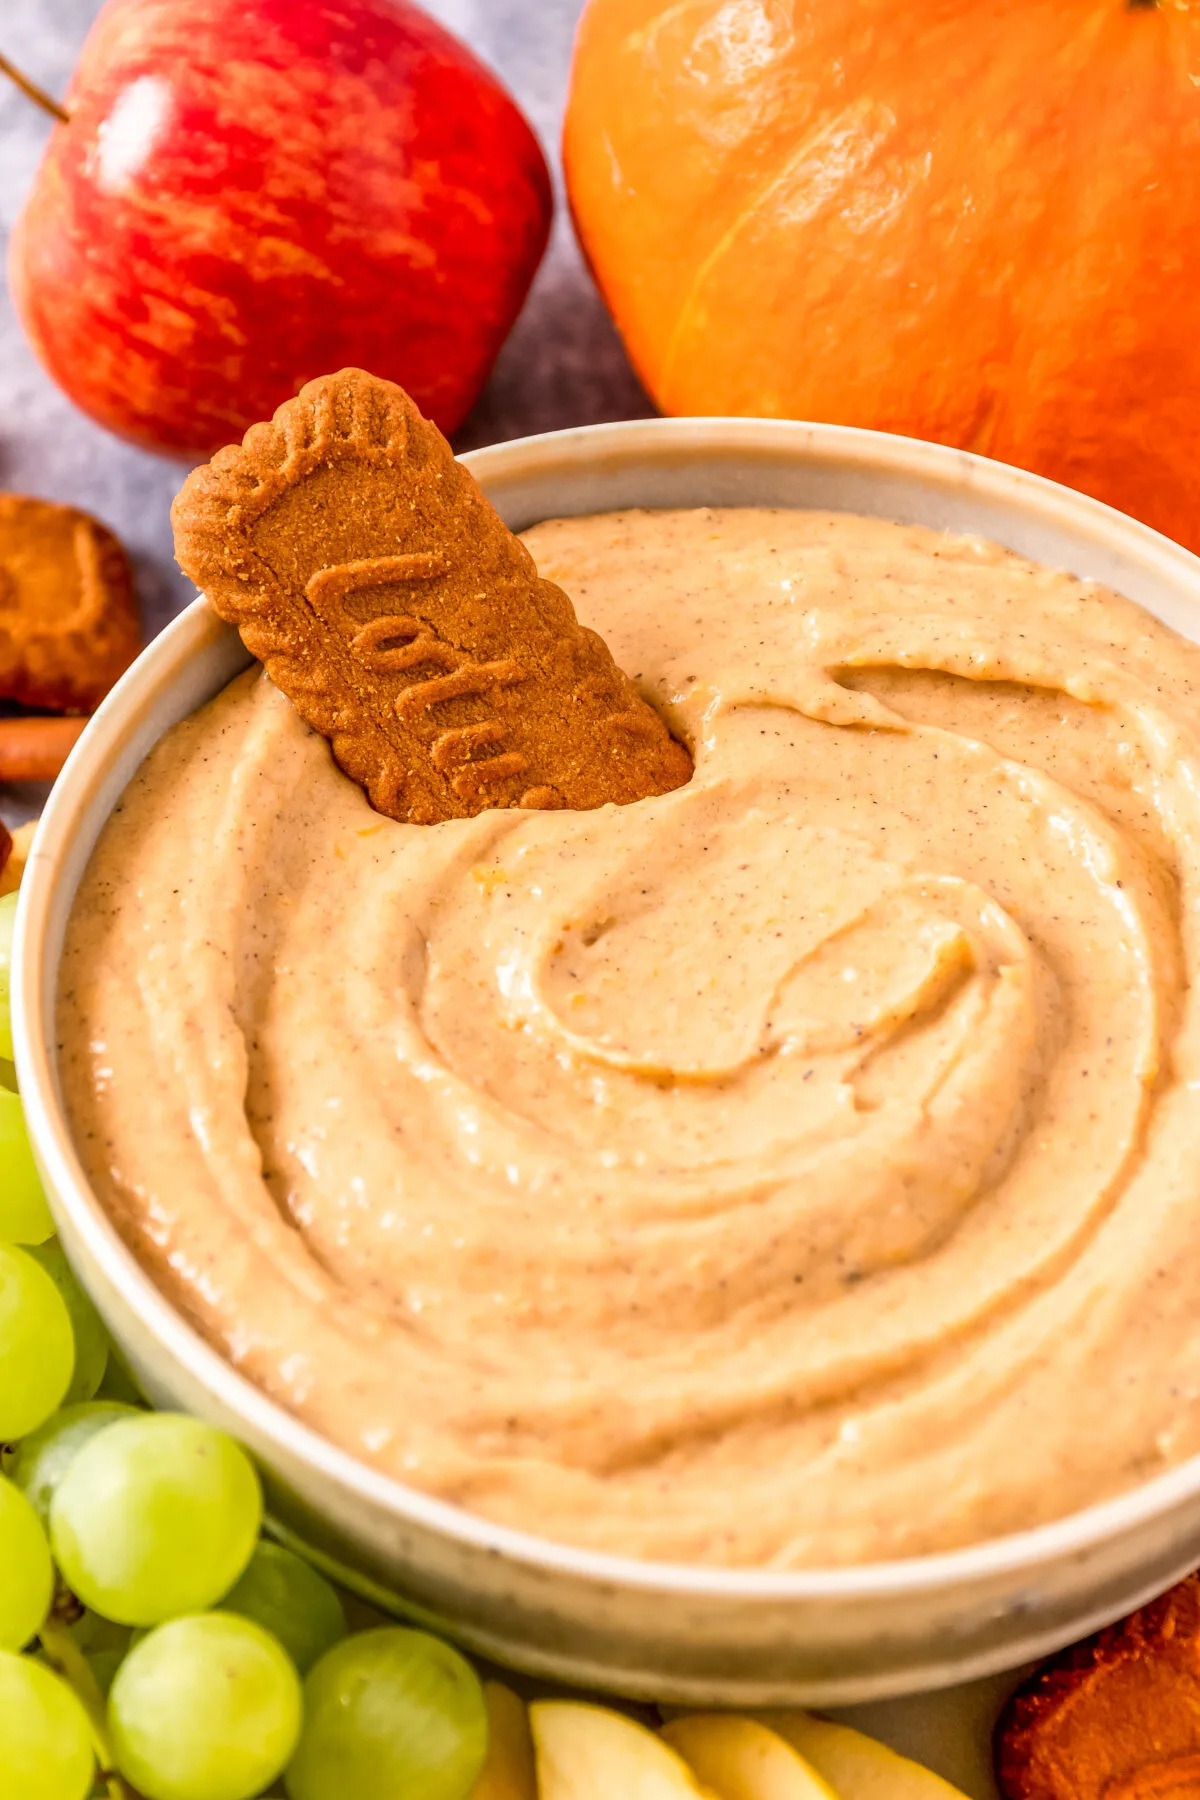 This pumpkin cream cheese dip is a delicious and creamy way to enjoy fall flavors. A perfect party appetizer or snack, it's always a hit!